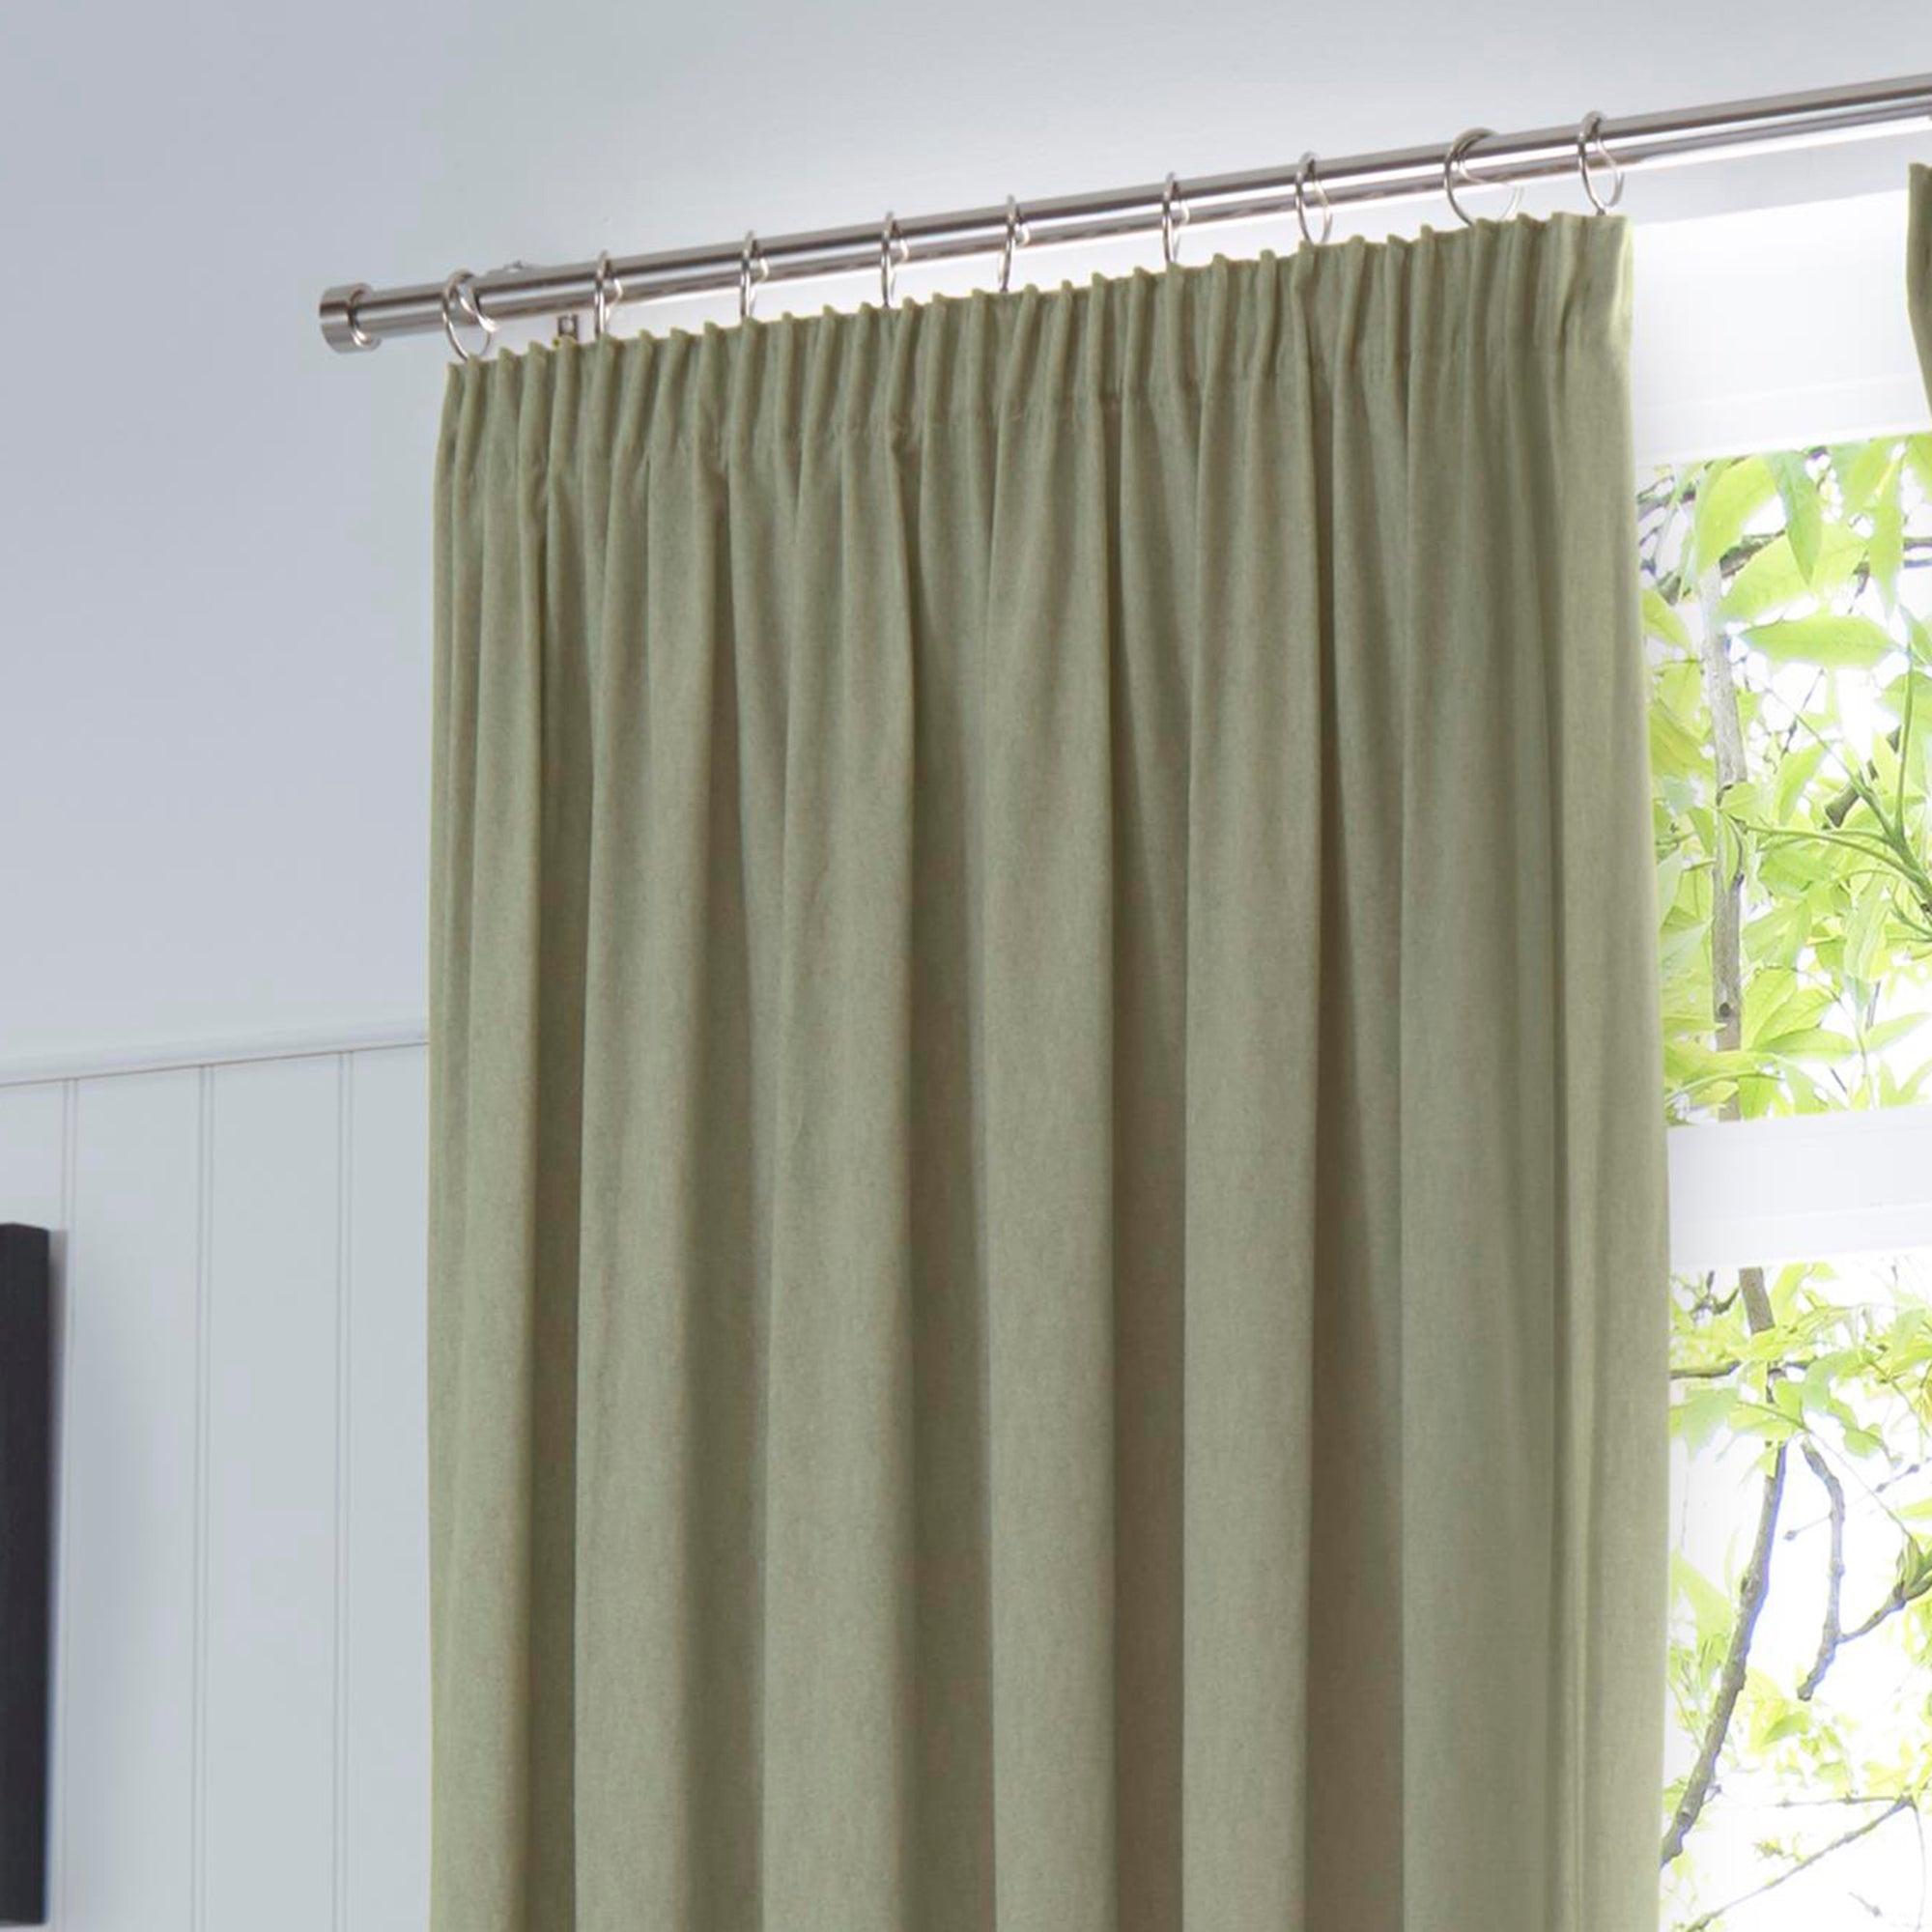 Dijon - Blackout / Thermal Insulated Pair of Pencil Pleat Curtains in Green - by Fusion